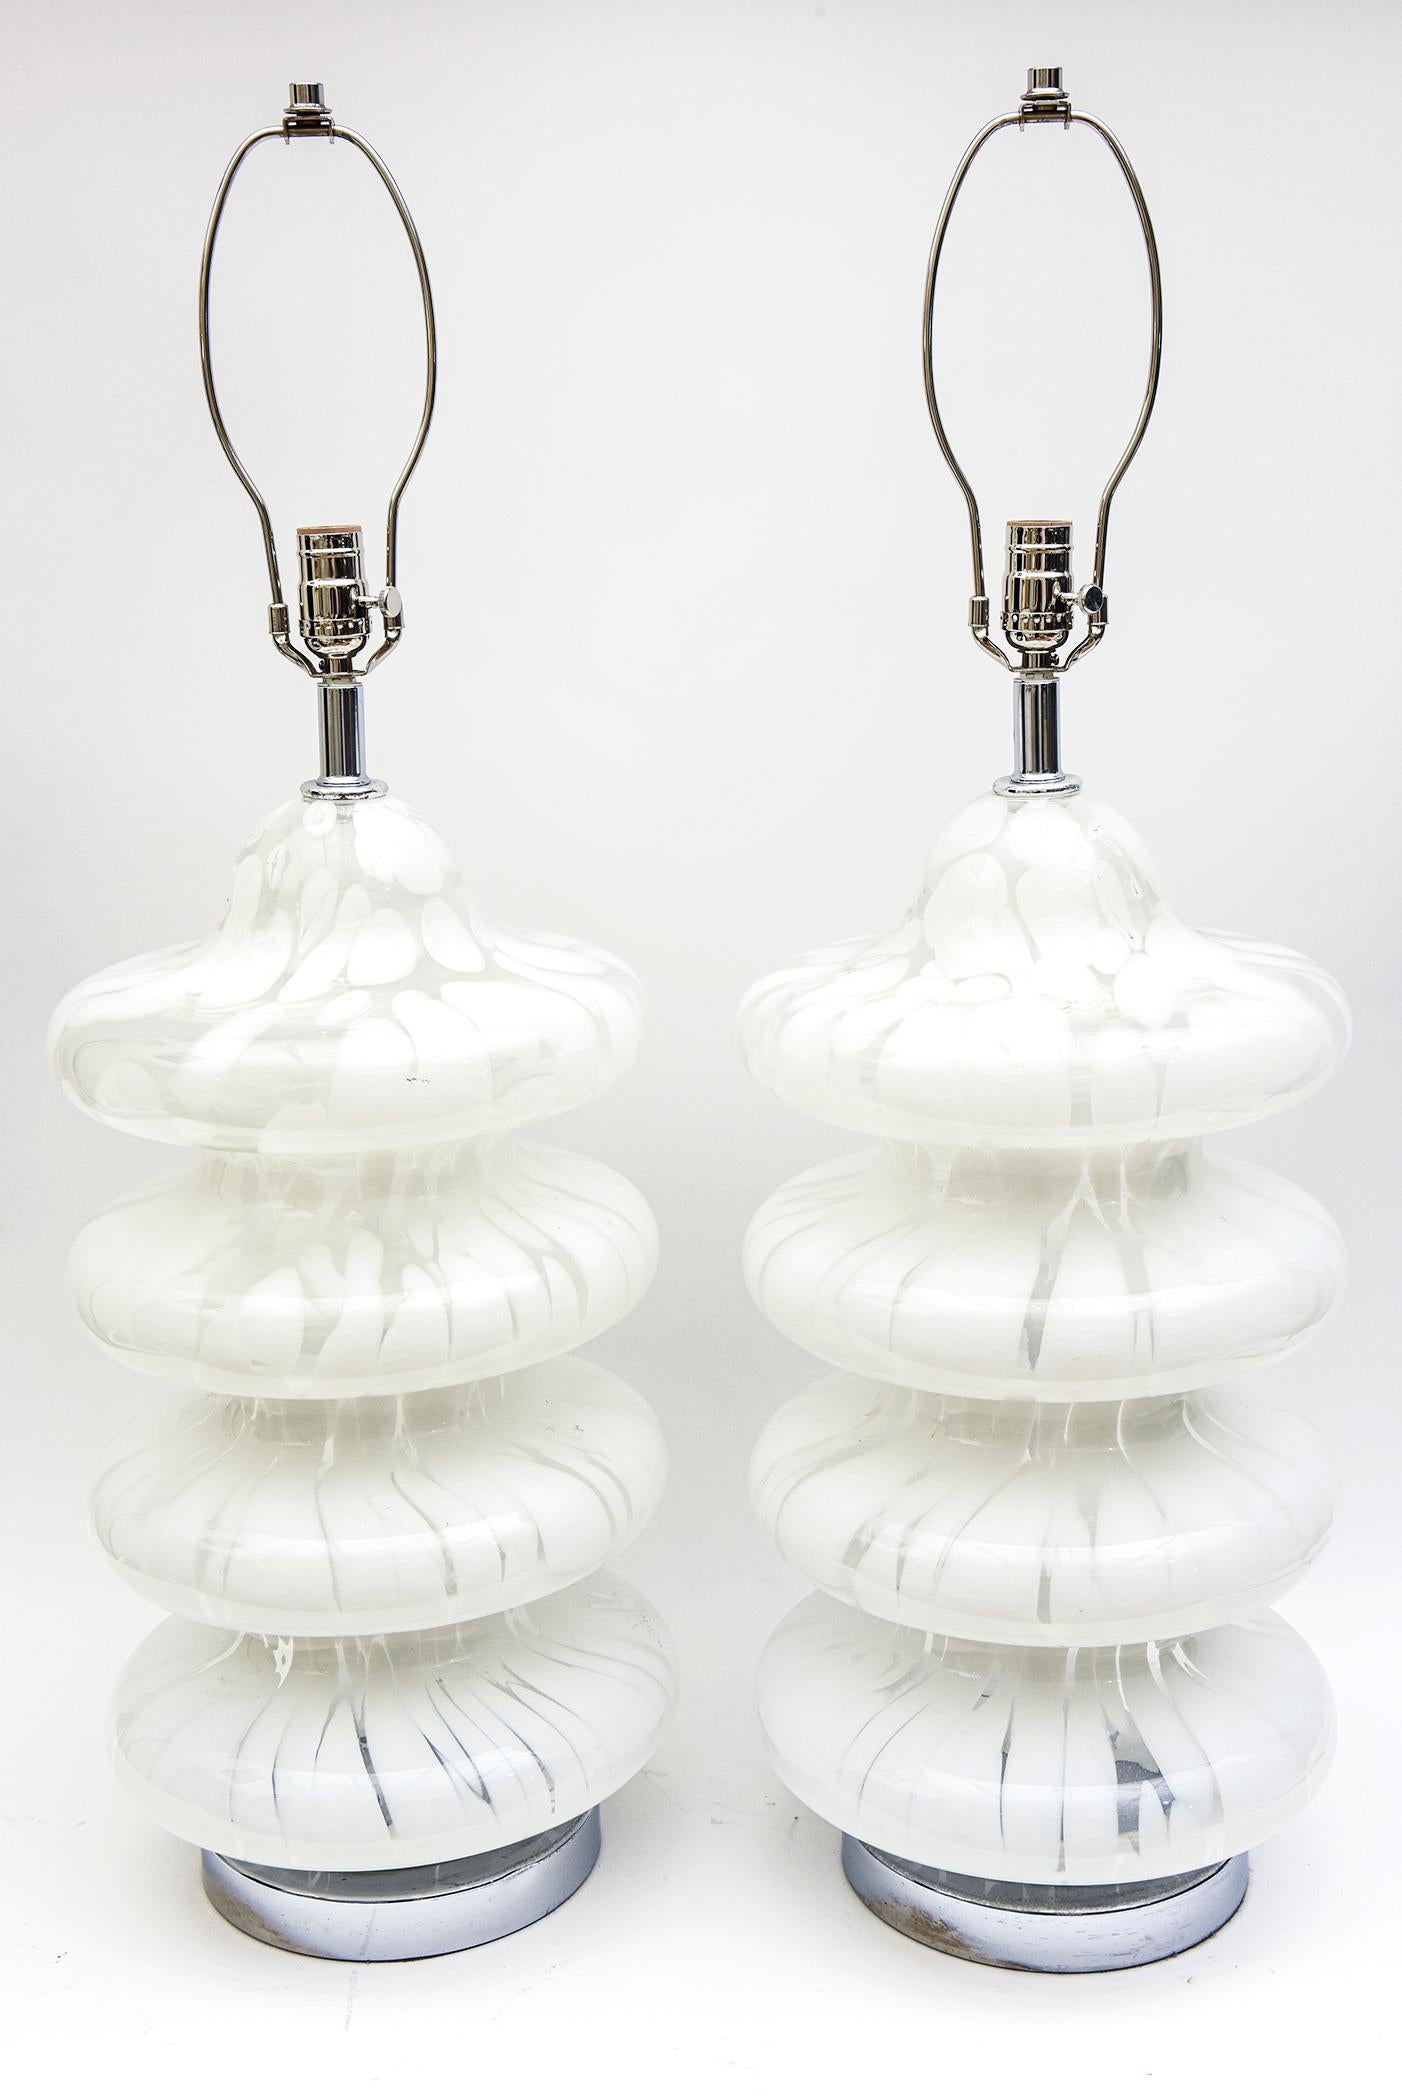 italien Vintage Carlo Nason for Murano White Tiered Pagoda Glass Lamps Pair Of en vente